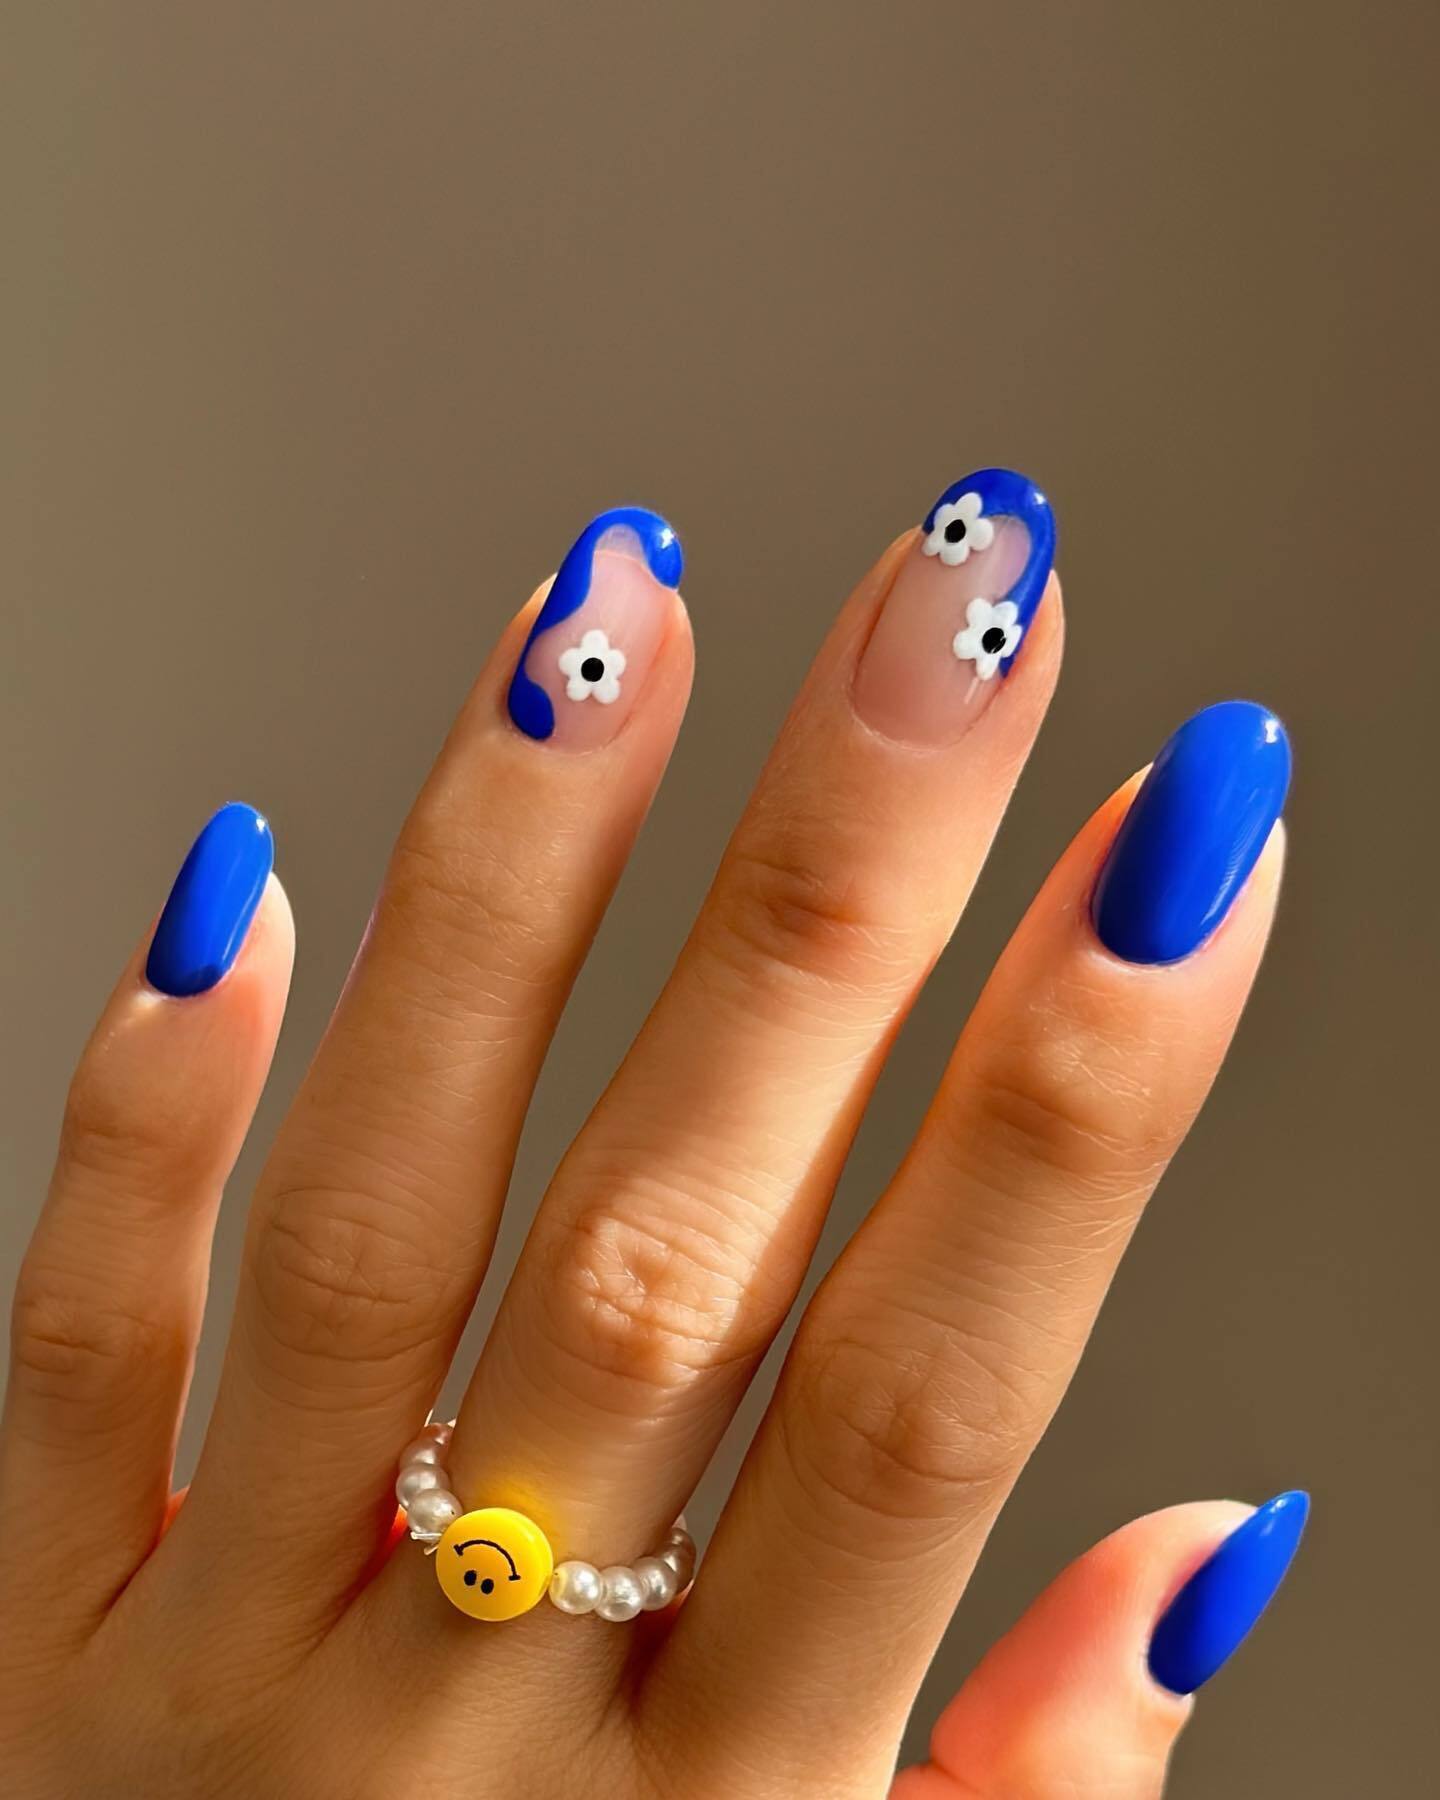 The most beautiful manicure of spring. 12 nail designs that breathe freshness and add mood